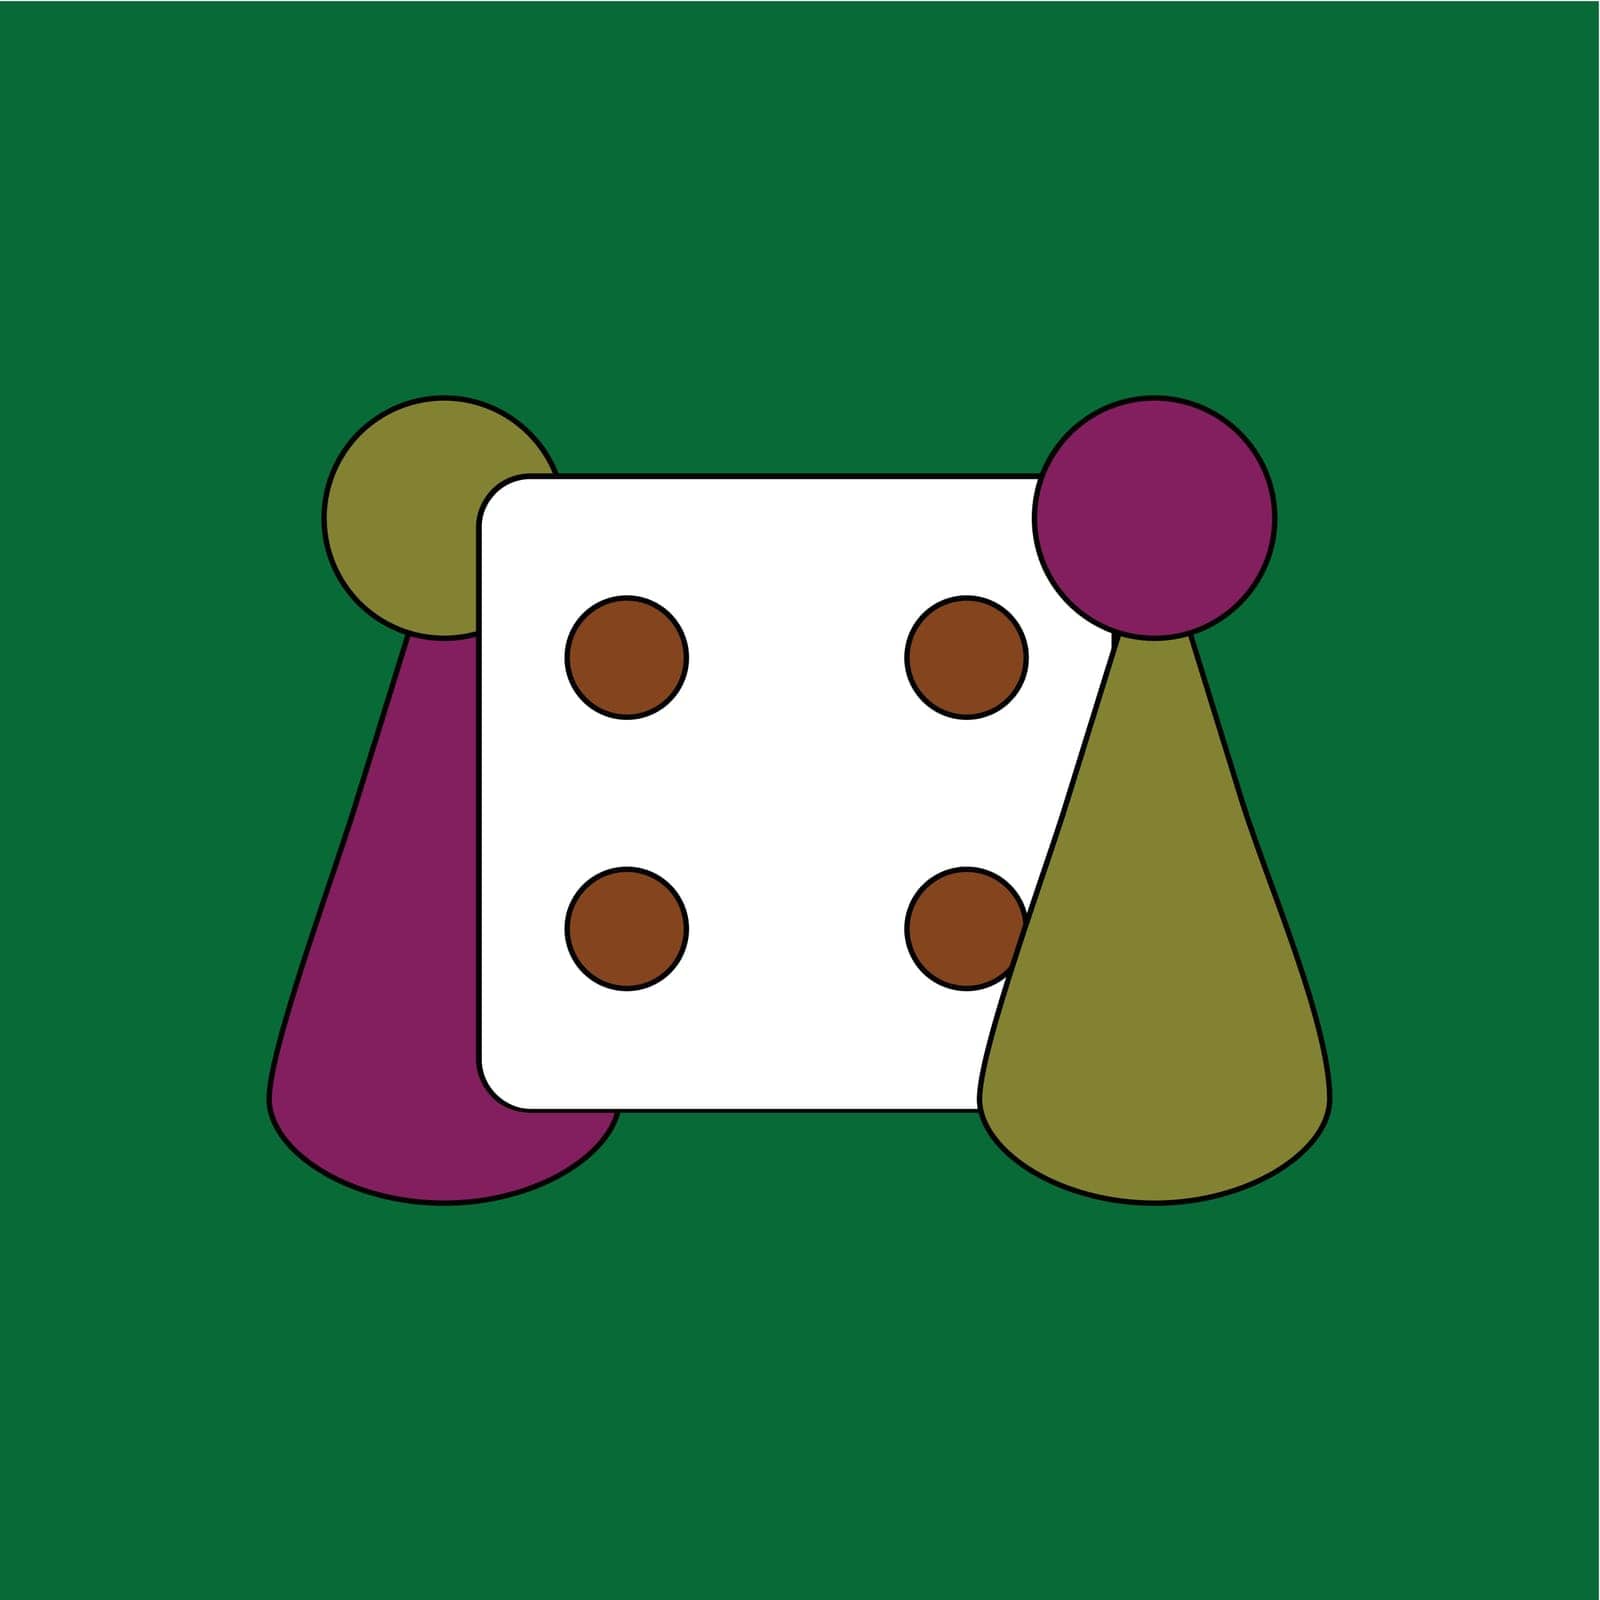 play,symbol,game,activity,icon,dice,loss,flat,design,plan,win,leisure,table,group,toy,spinner,figure,fortune,gamble,pastime,lose,team,collection,piece,success,pawn,debt,fun,board,child by ogqcorp